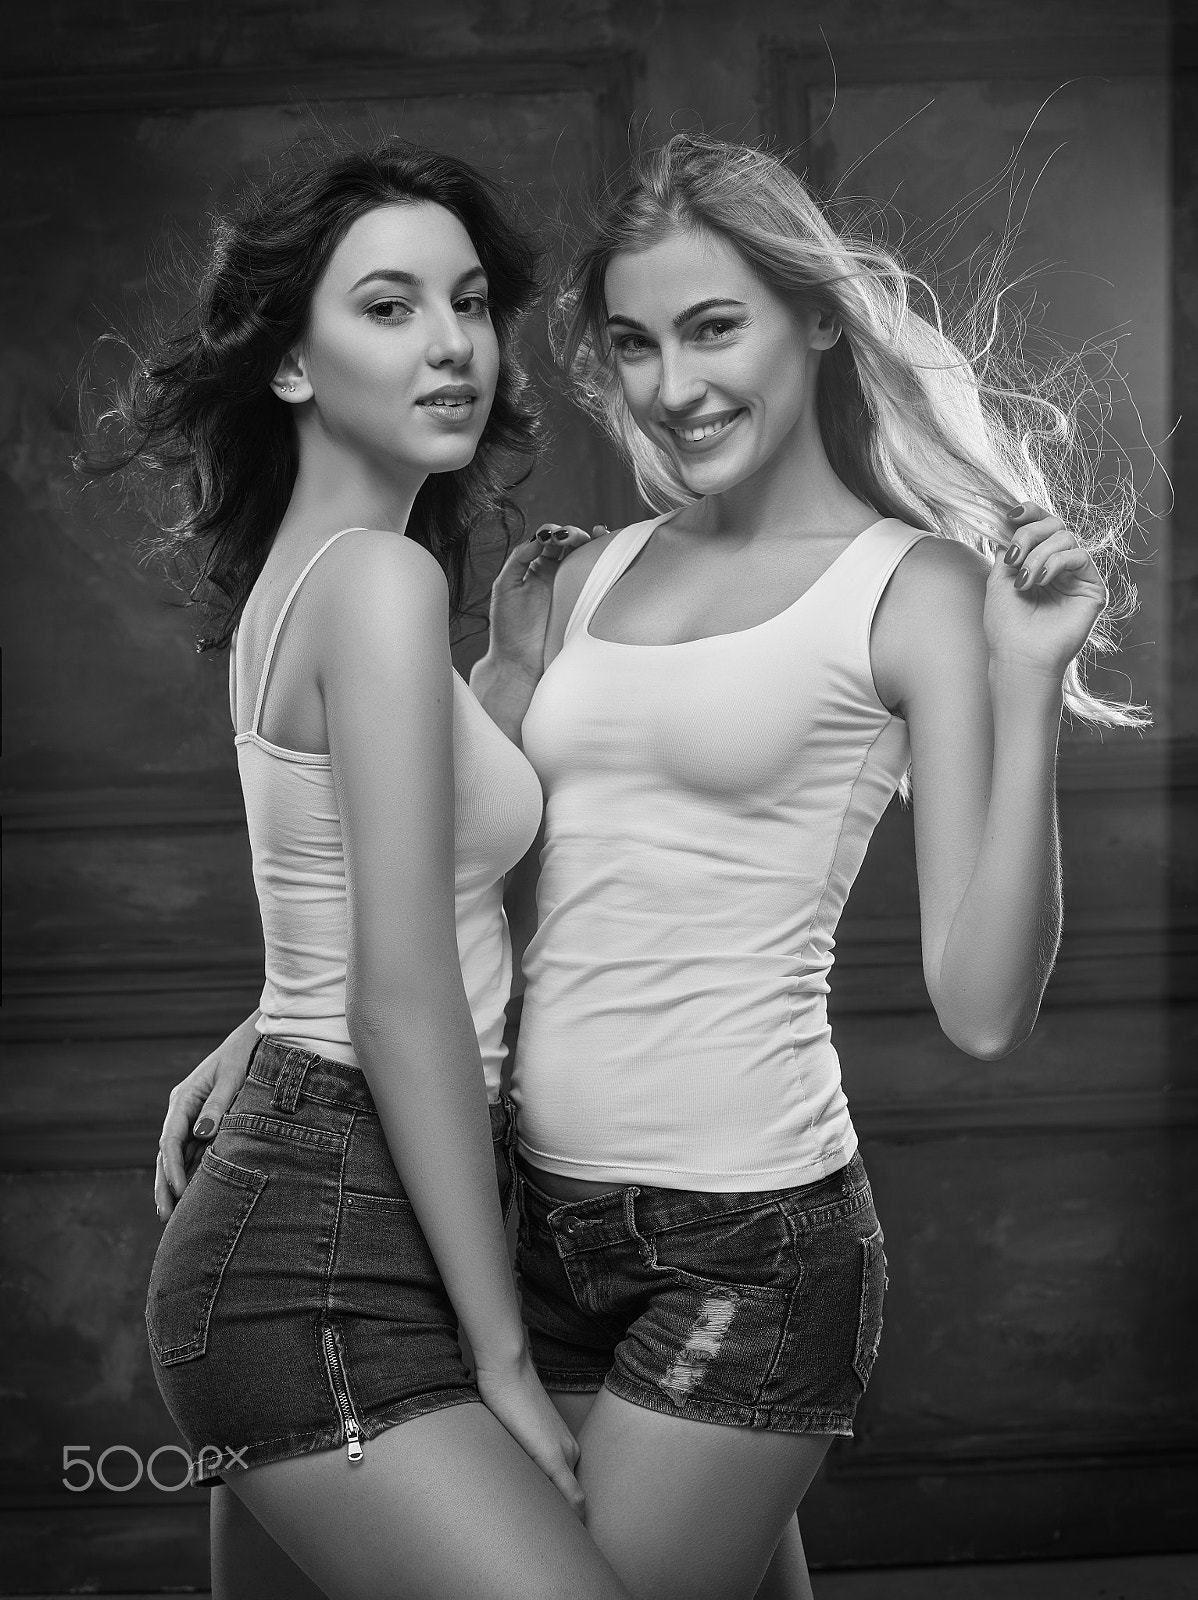 Phase One IQ160 sample photo. Two beautiful women in erotic lingerie photography